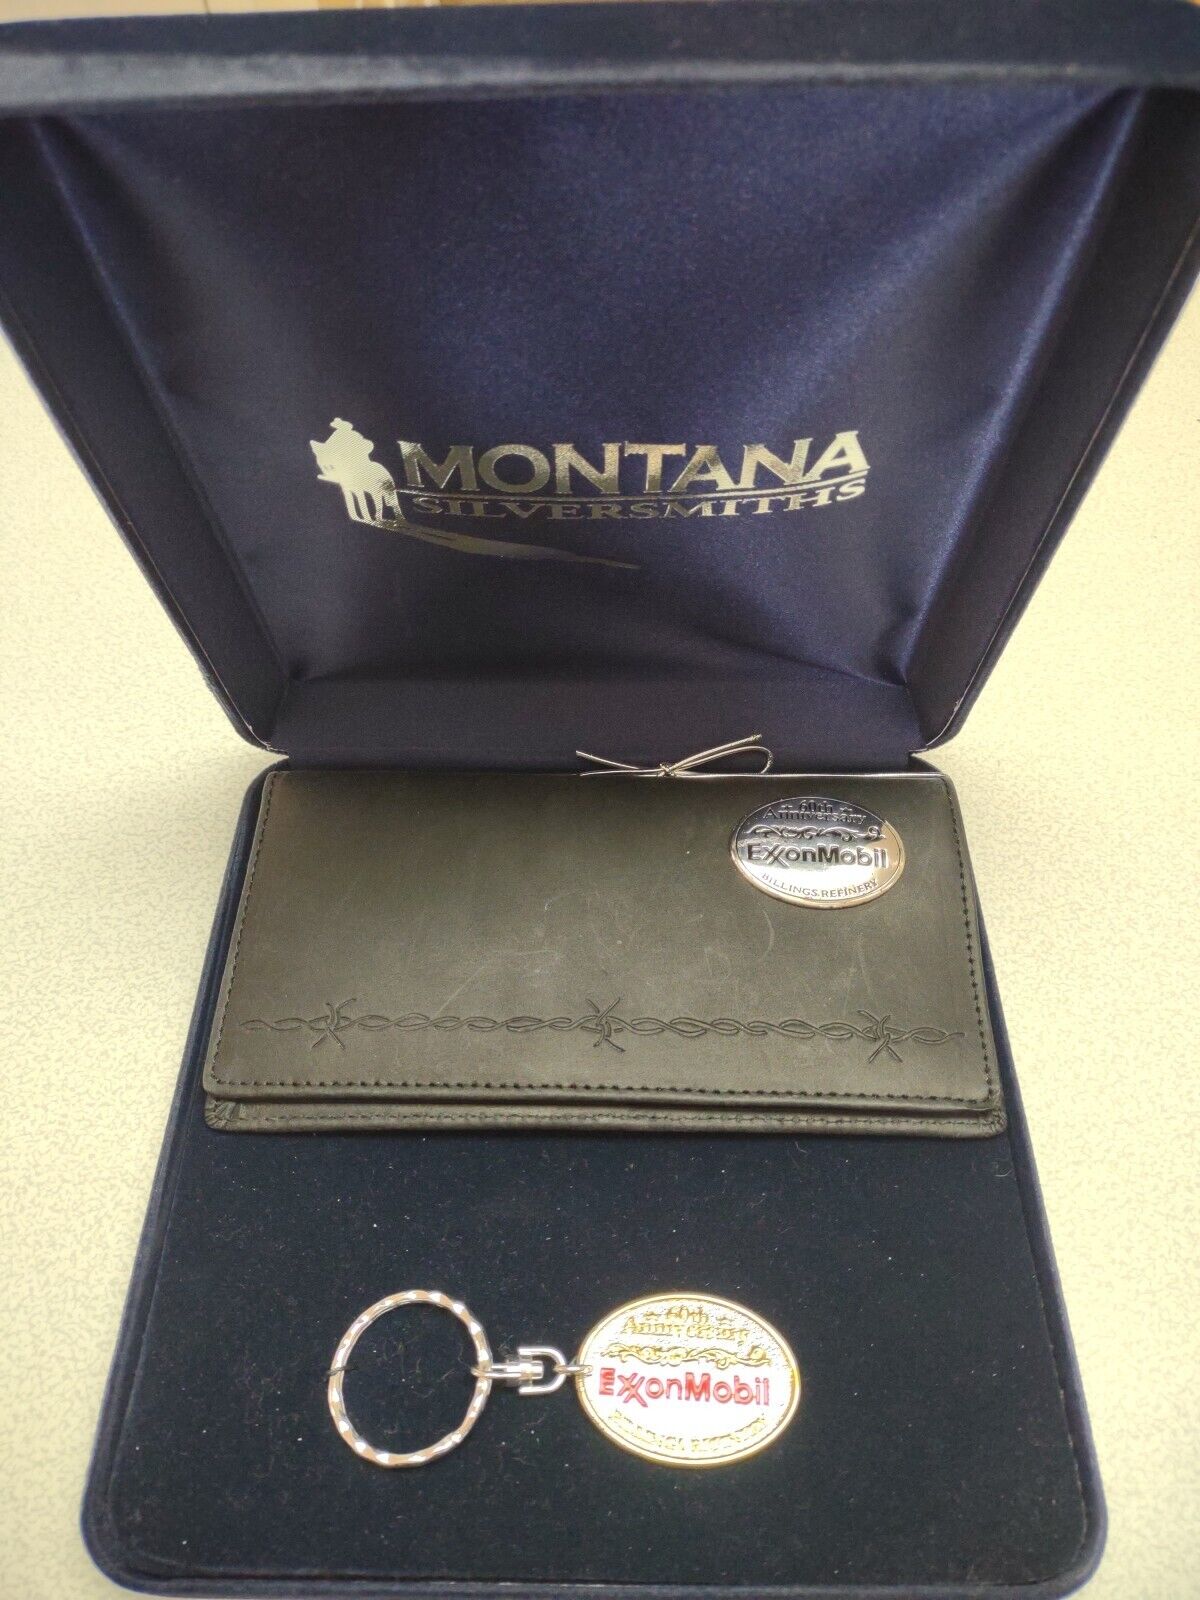 EXXON MOBILE Anniversary Collection From Montana Silversmiths Never Used In Box